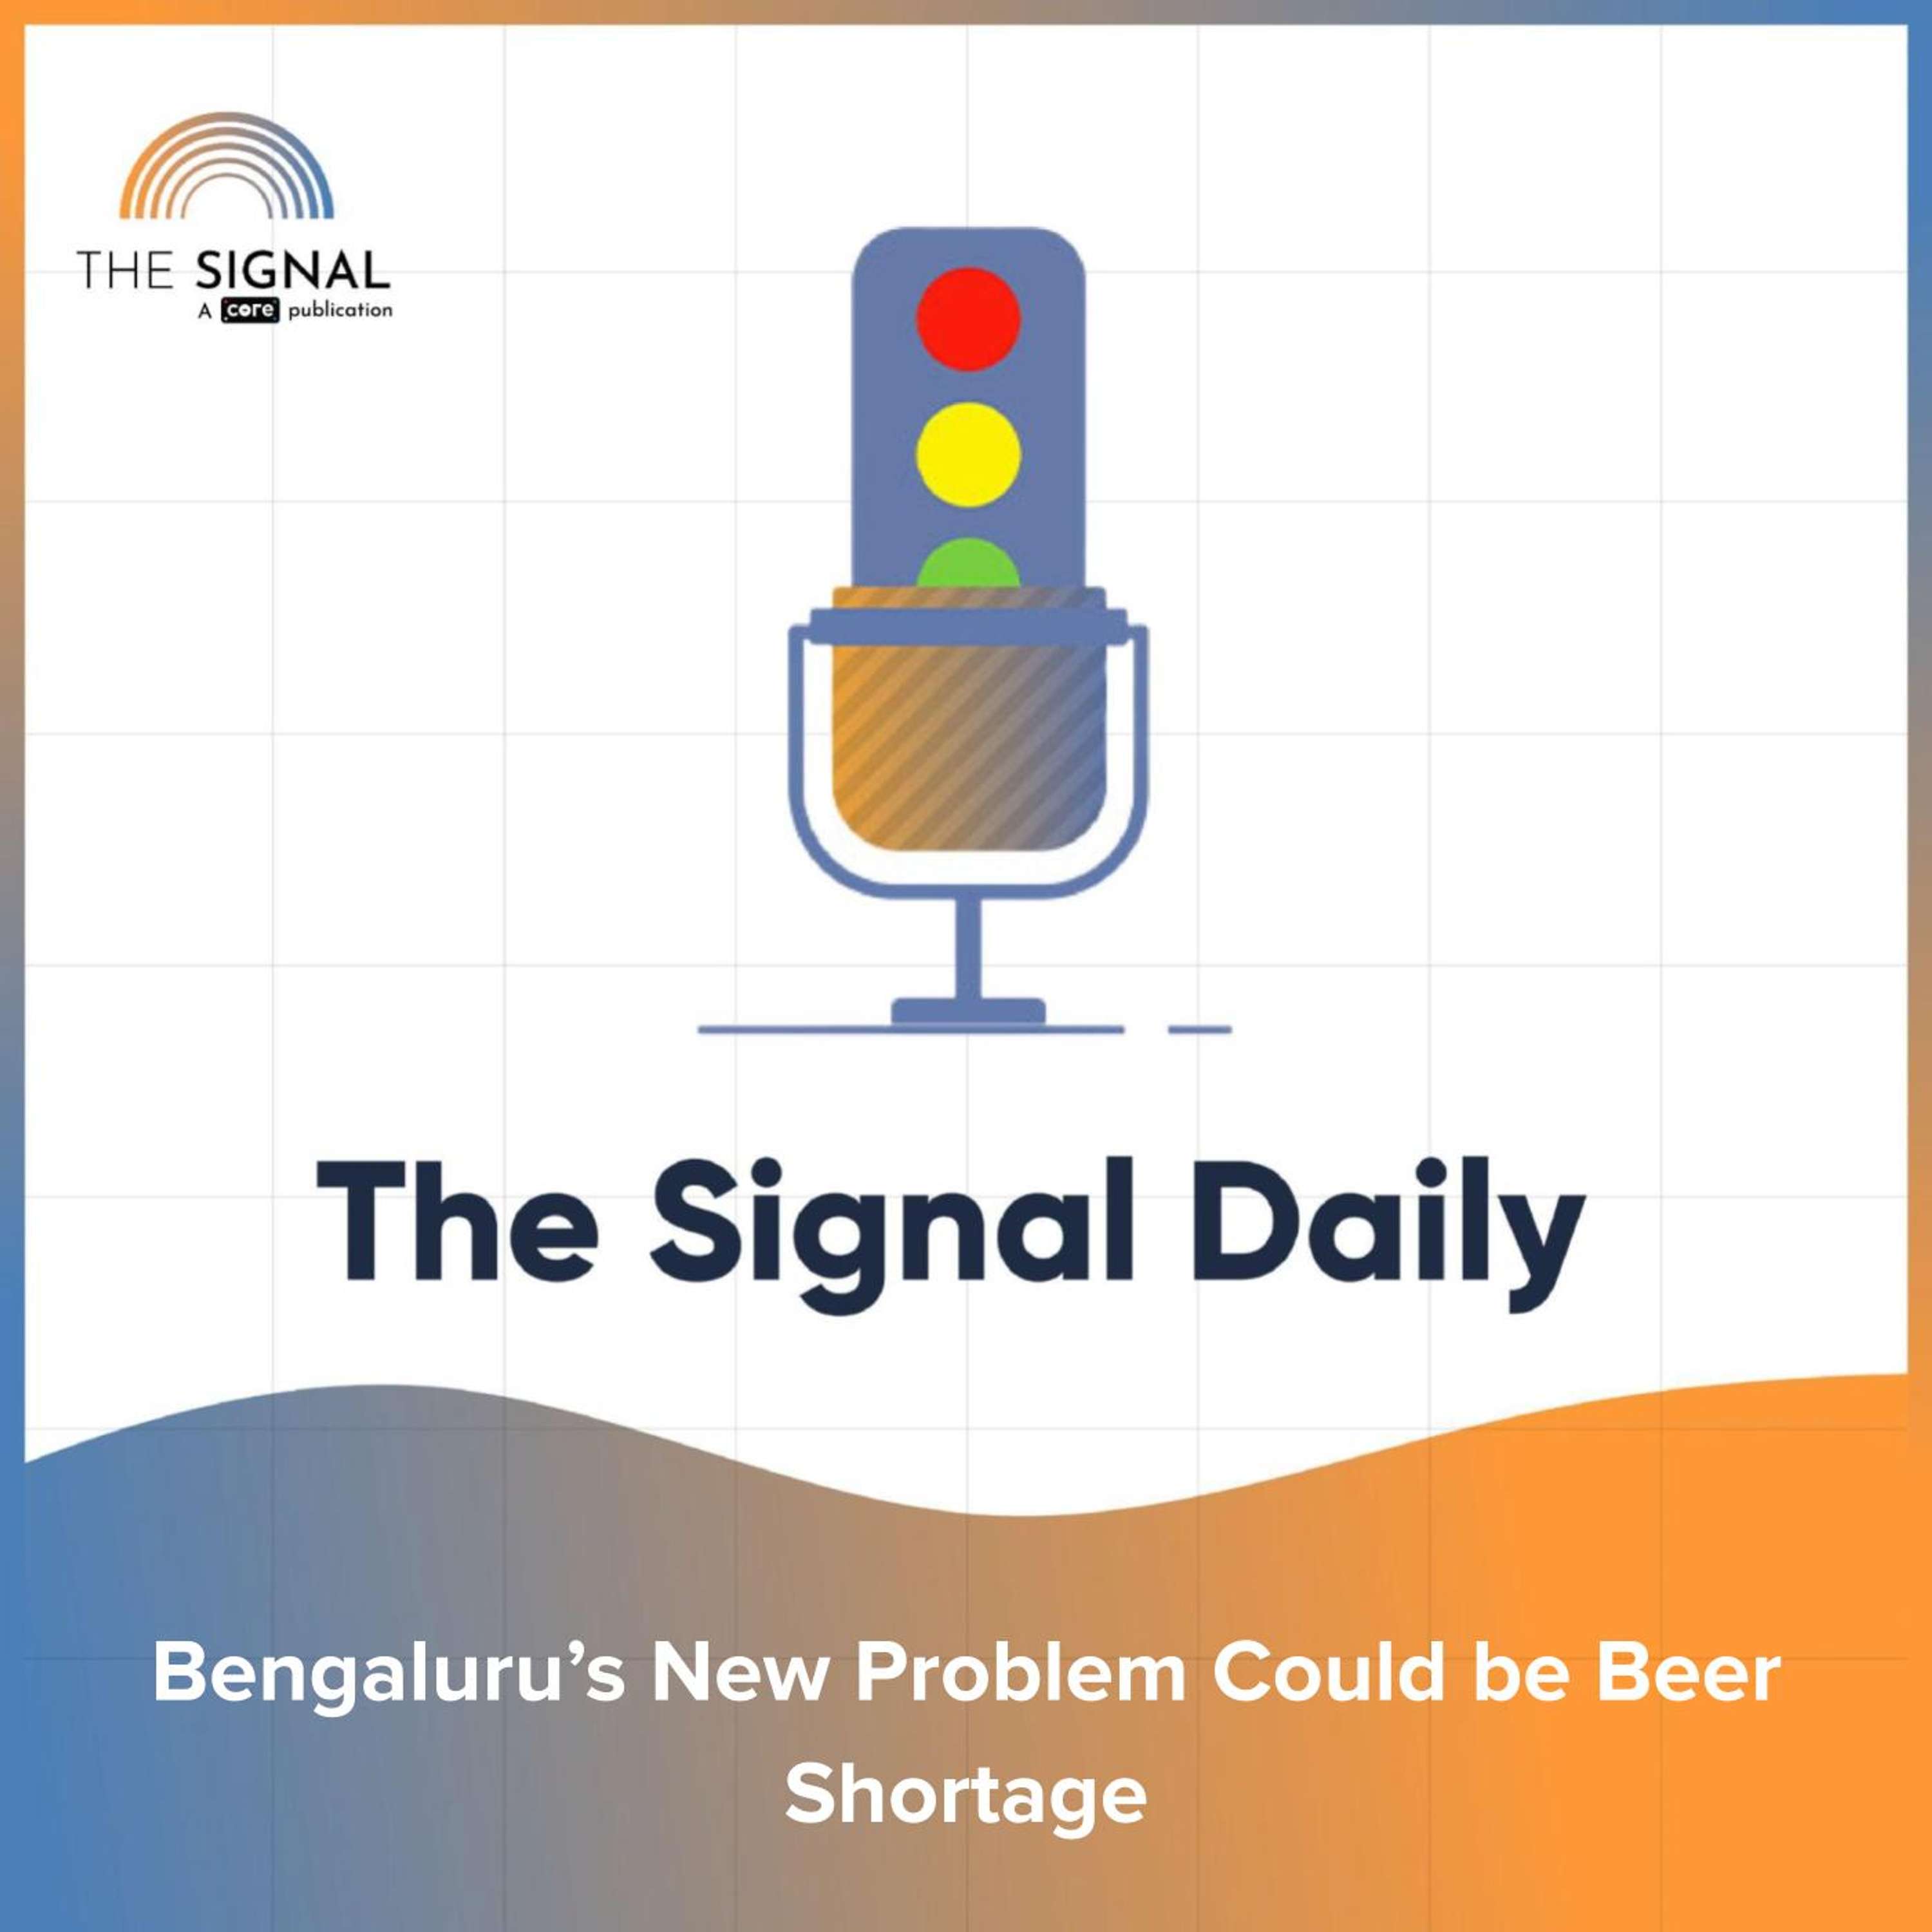 Bengaluru’s New Problem Could be Beer Shortage